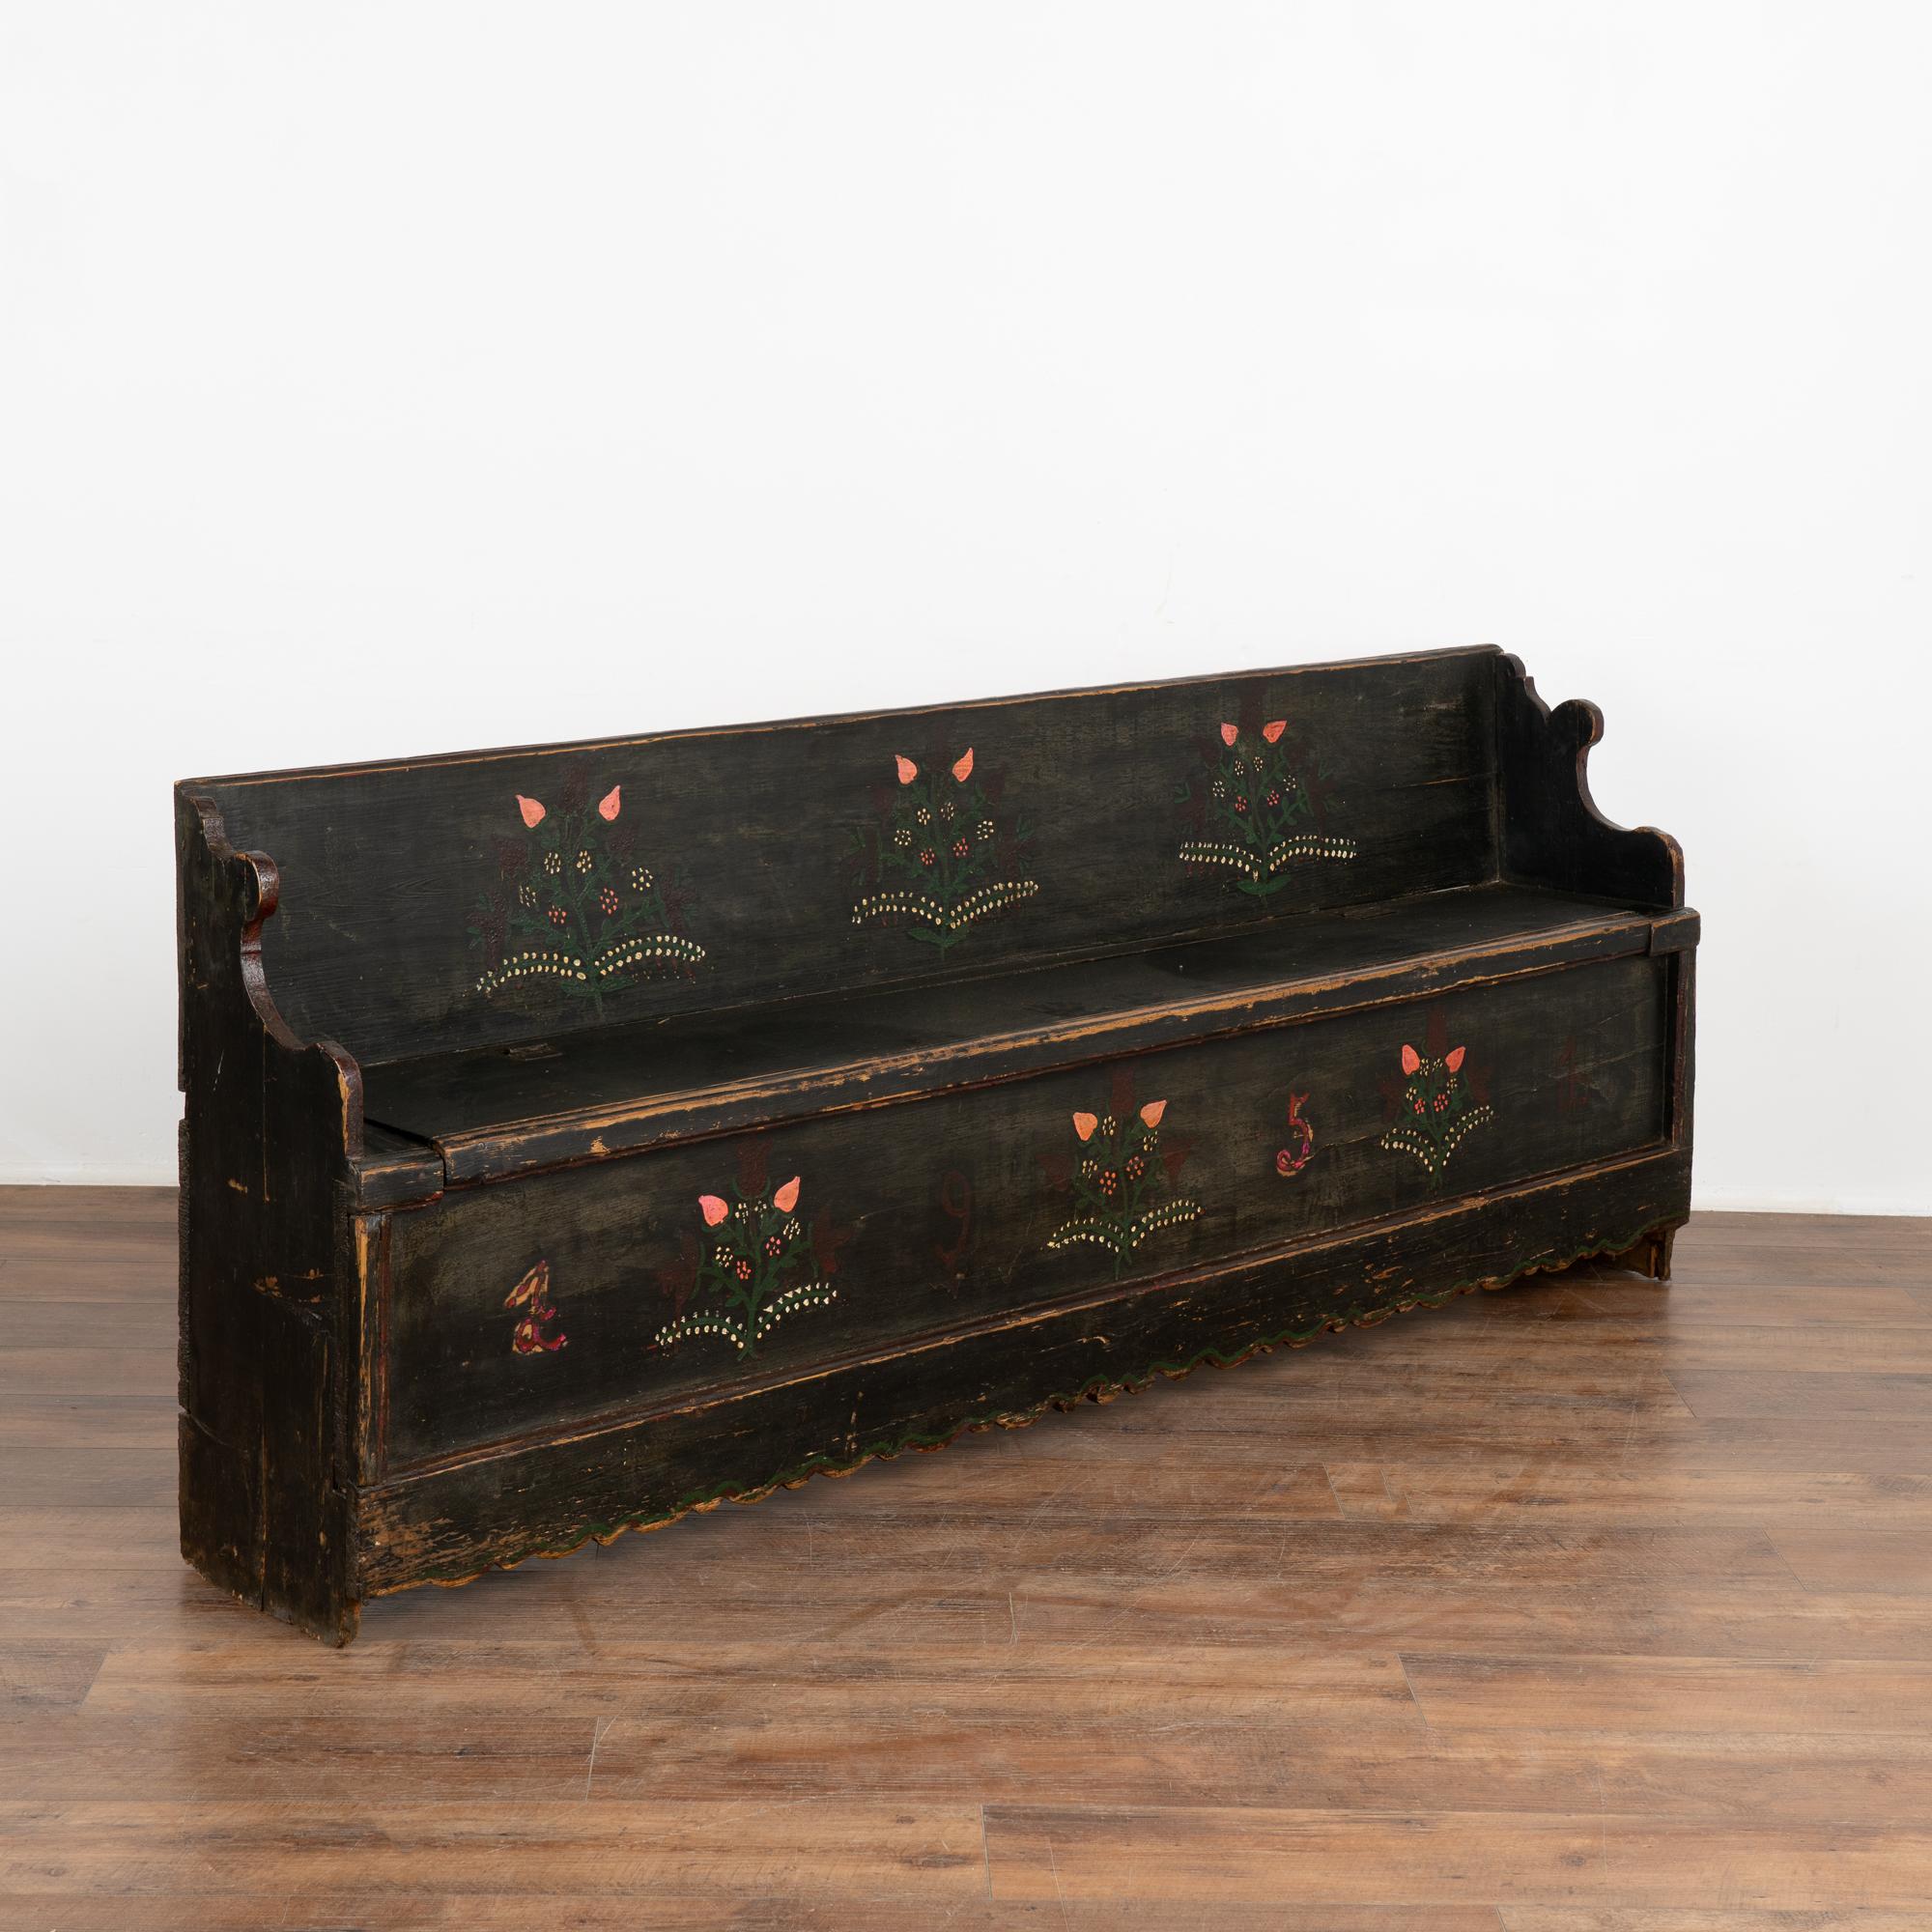 Original hand painted black folk art pine bench with simple floral/vine folk art embellishments along the front and back; dated 1951. 
Unique to this bench is the narrow depth at only 13